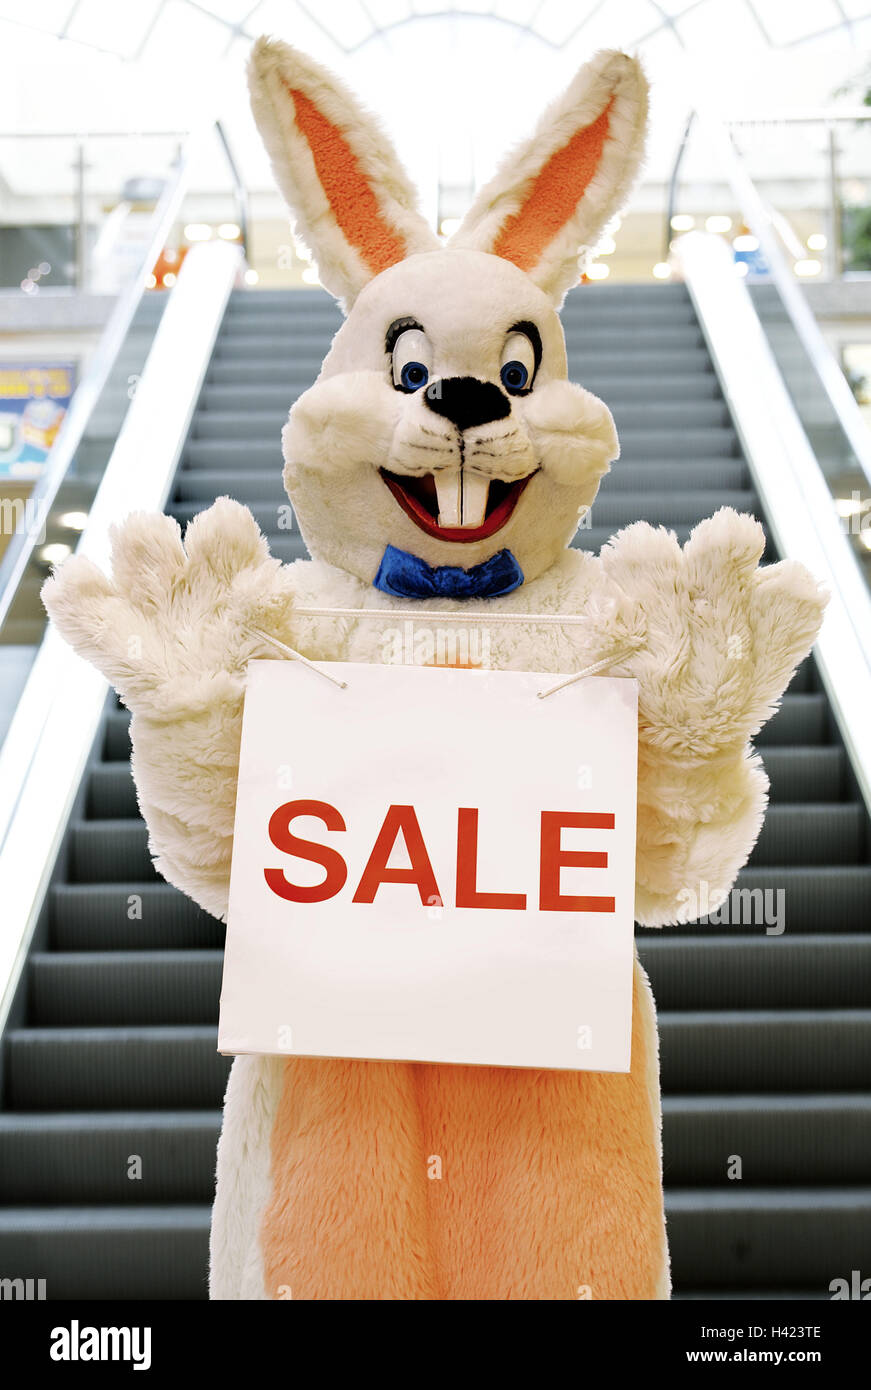 Department store, stairs, Easter bunny, carrier bag, label "SALE" Easter, Easter feast, child's faith, lining, panels, costume, hare's costume, hare, humor, fun, funnily, friendly, happy, joy, inside, purchasing, Easter purchasing, bargain purchase, offer Stock Photo